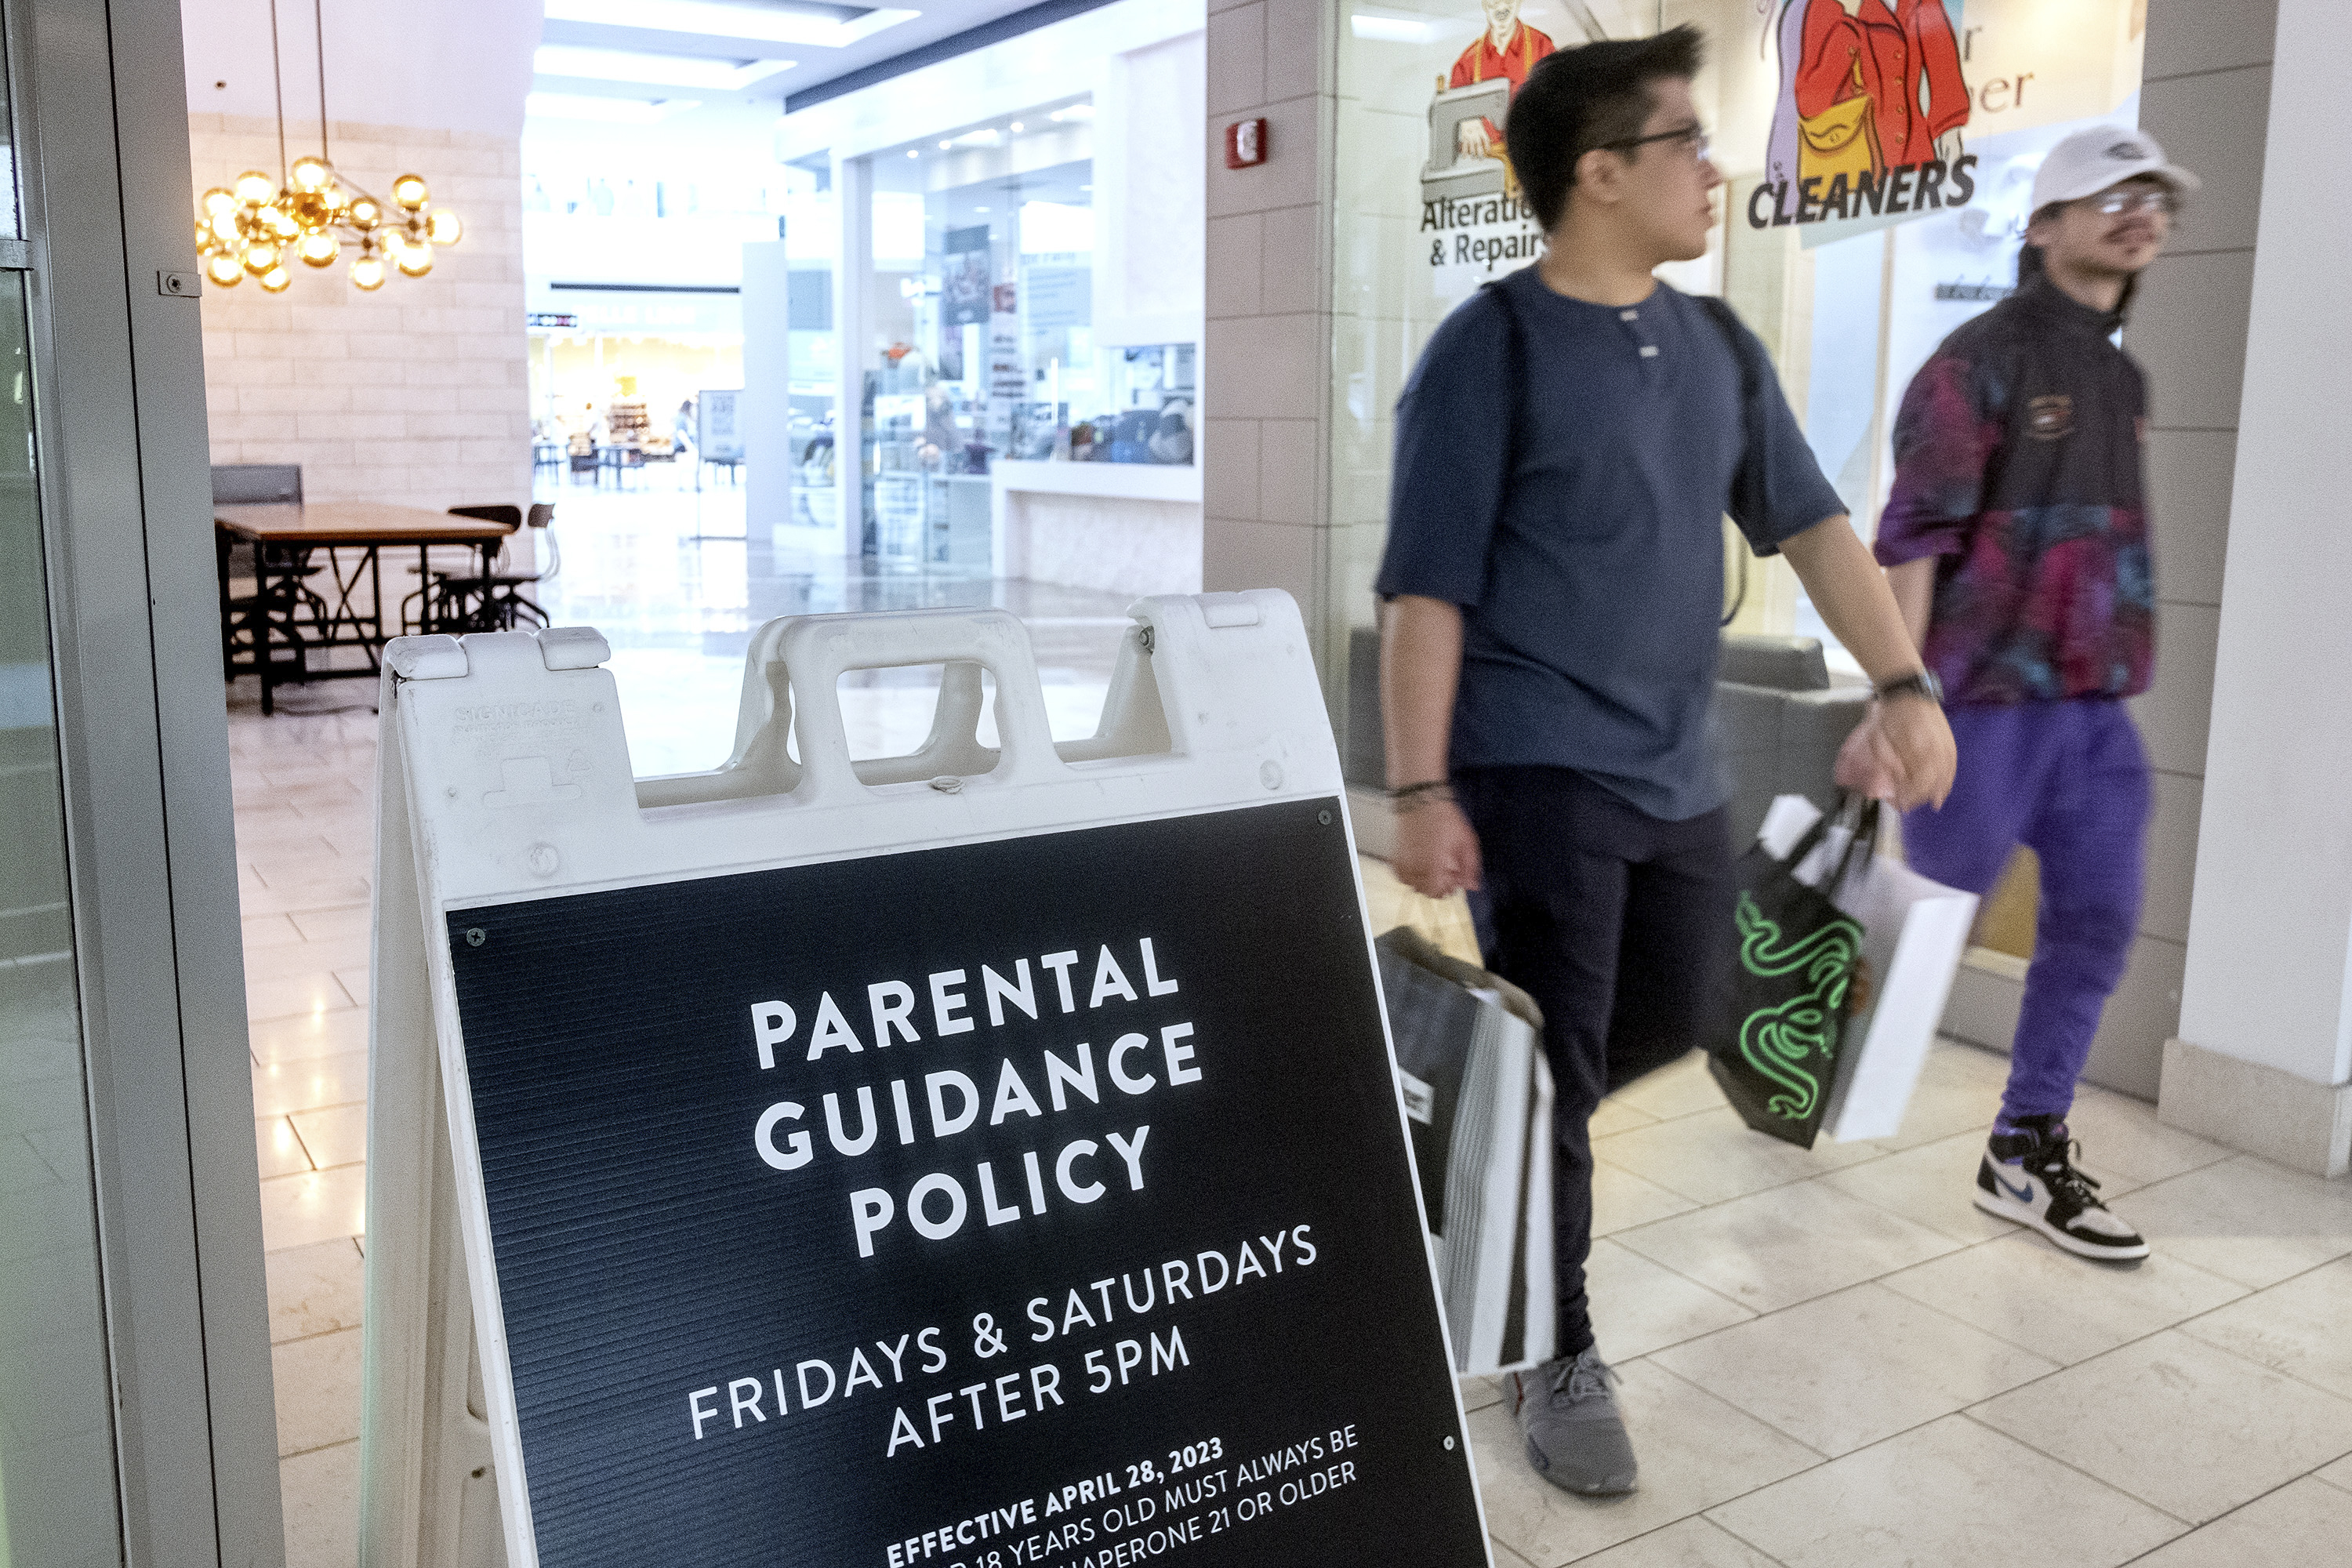 New Chaperone Rule for Teens Coming to Garden State Plaza Mall in